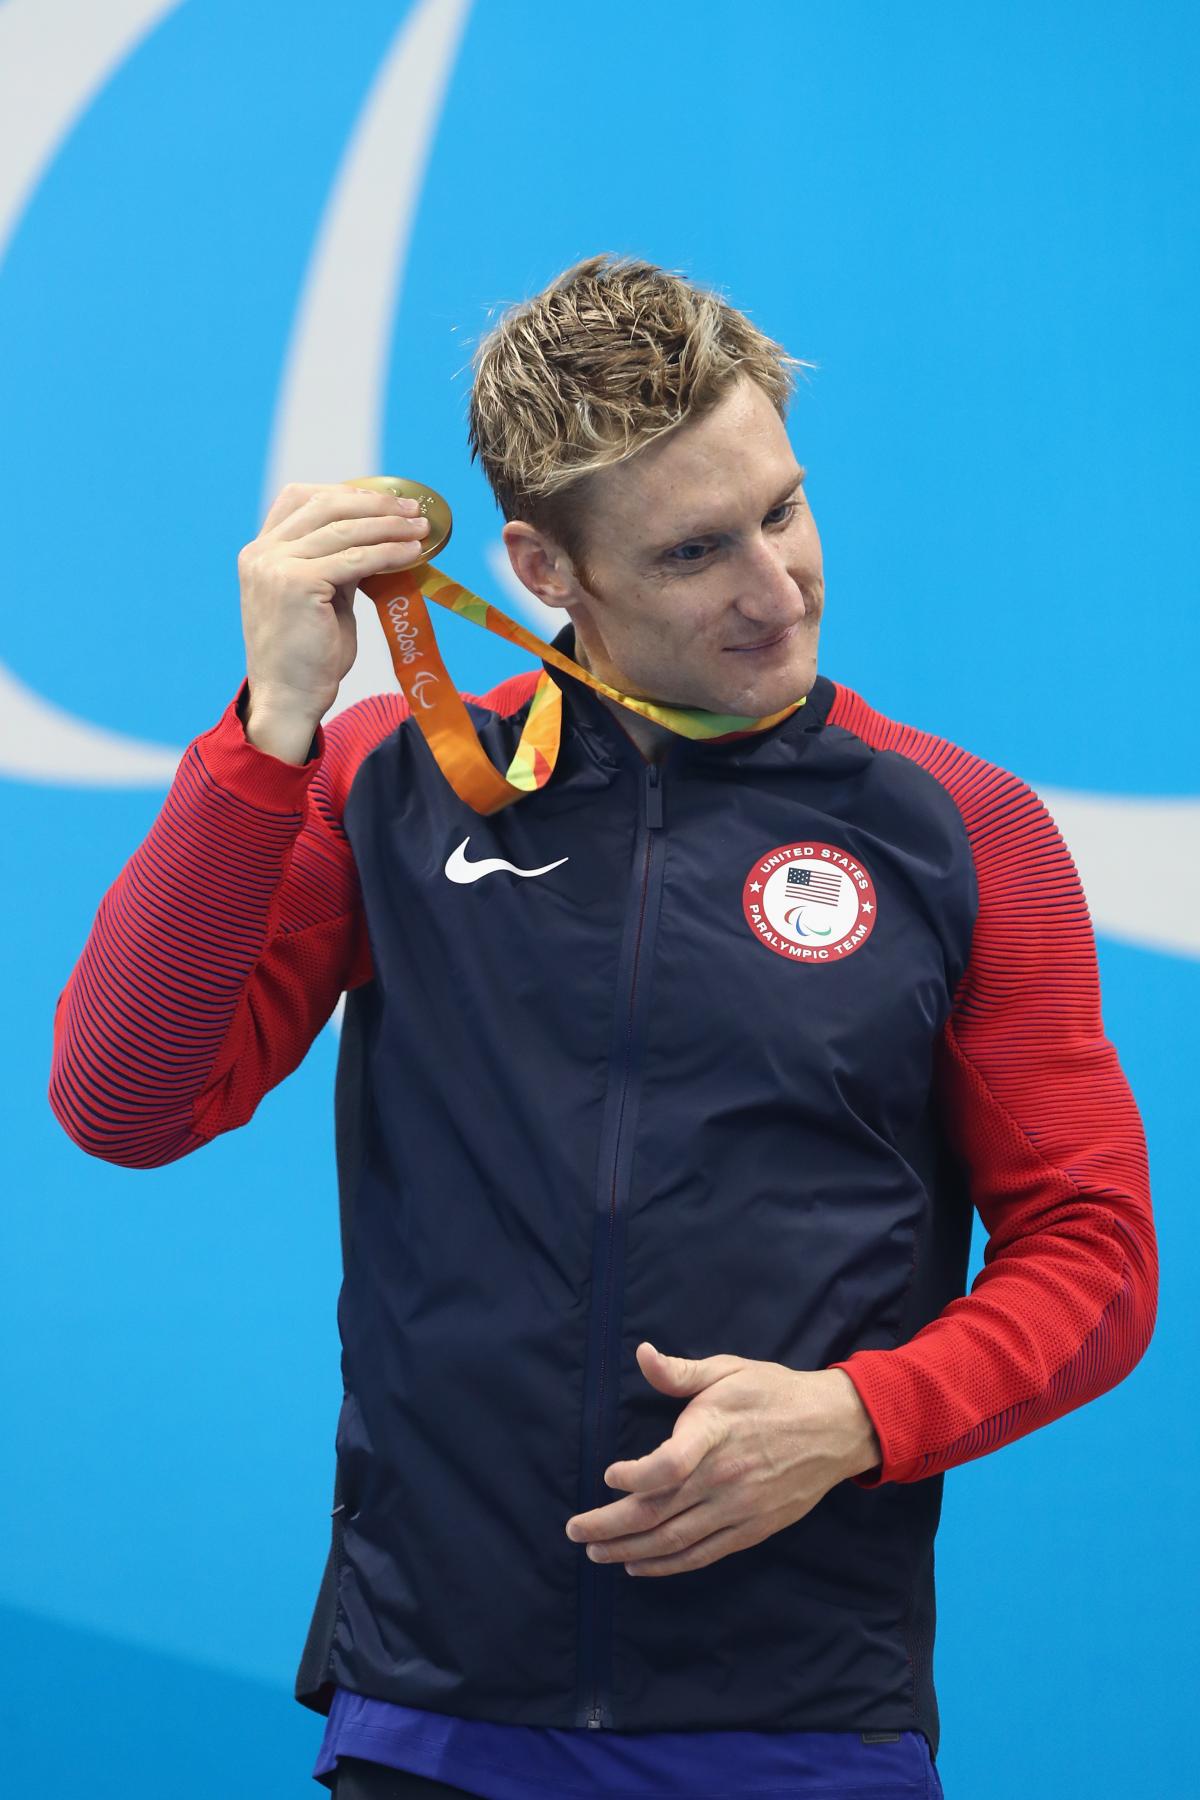 Blind man on podium shakes his gold medal near his ear